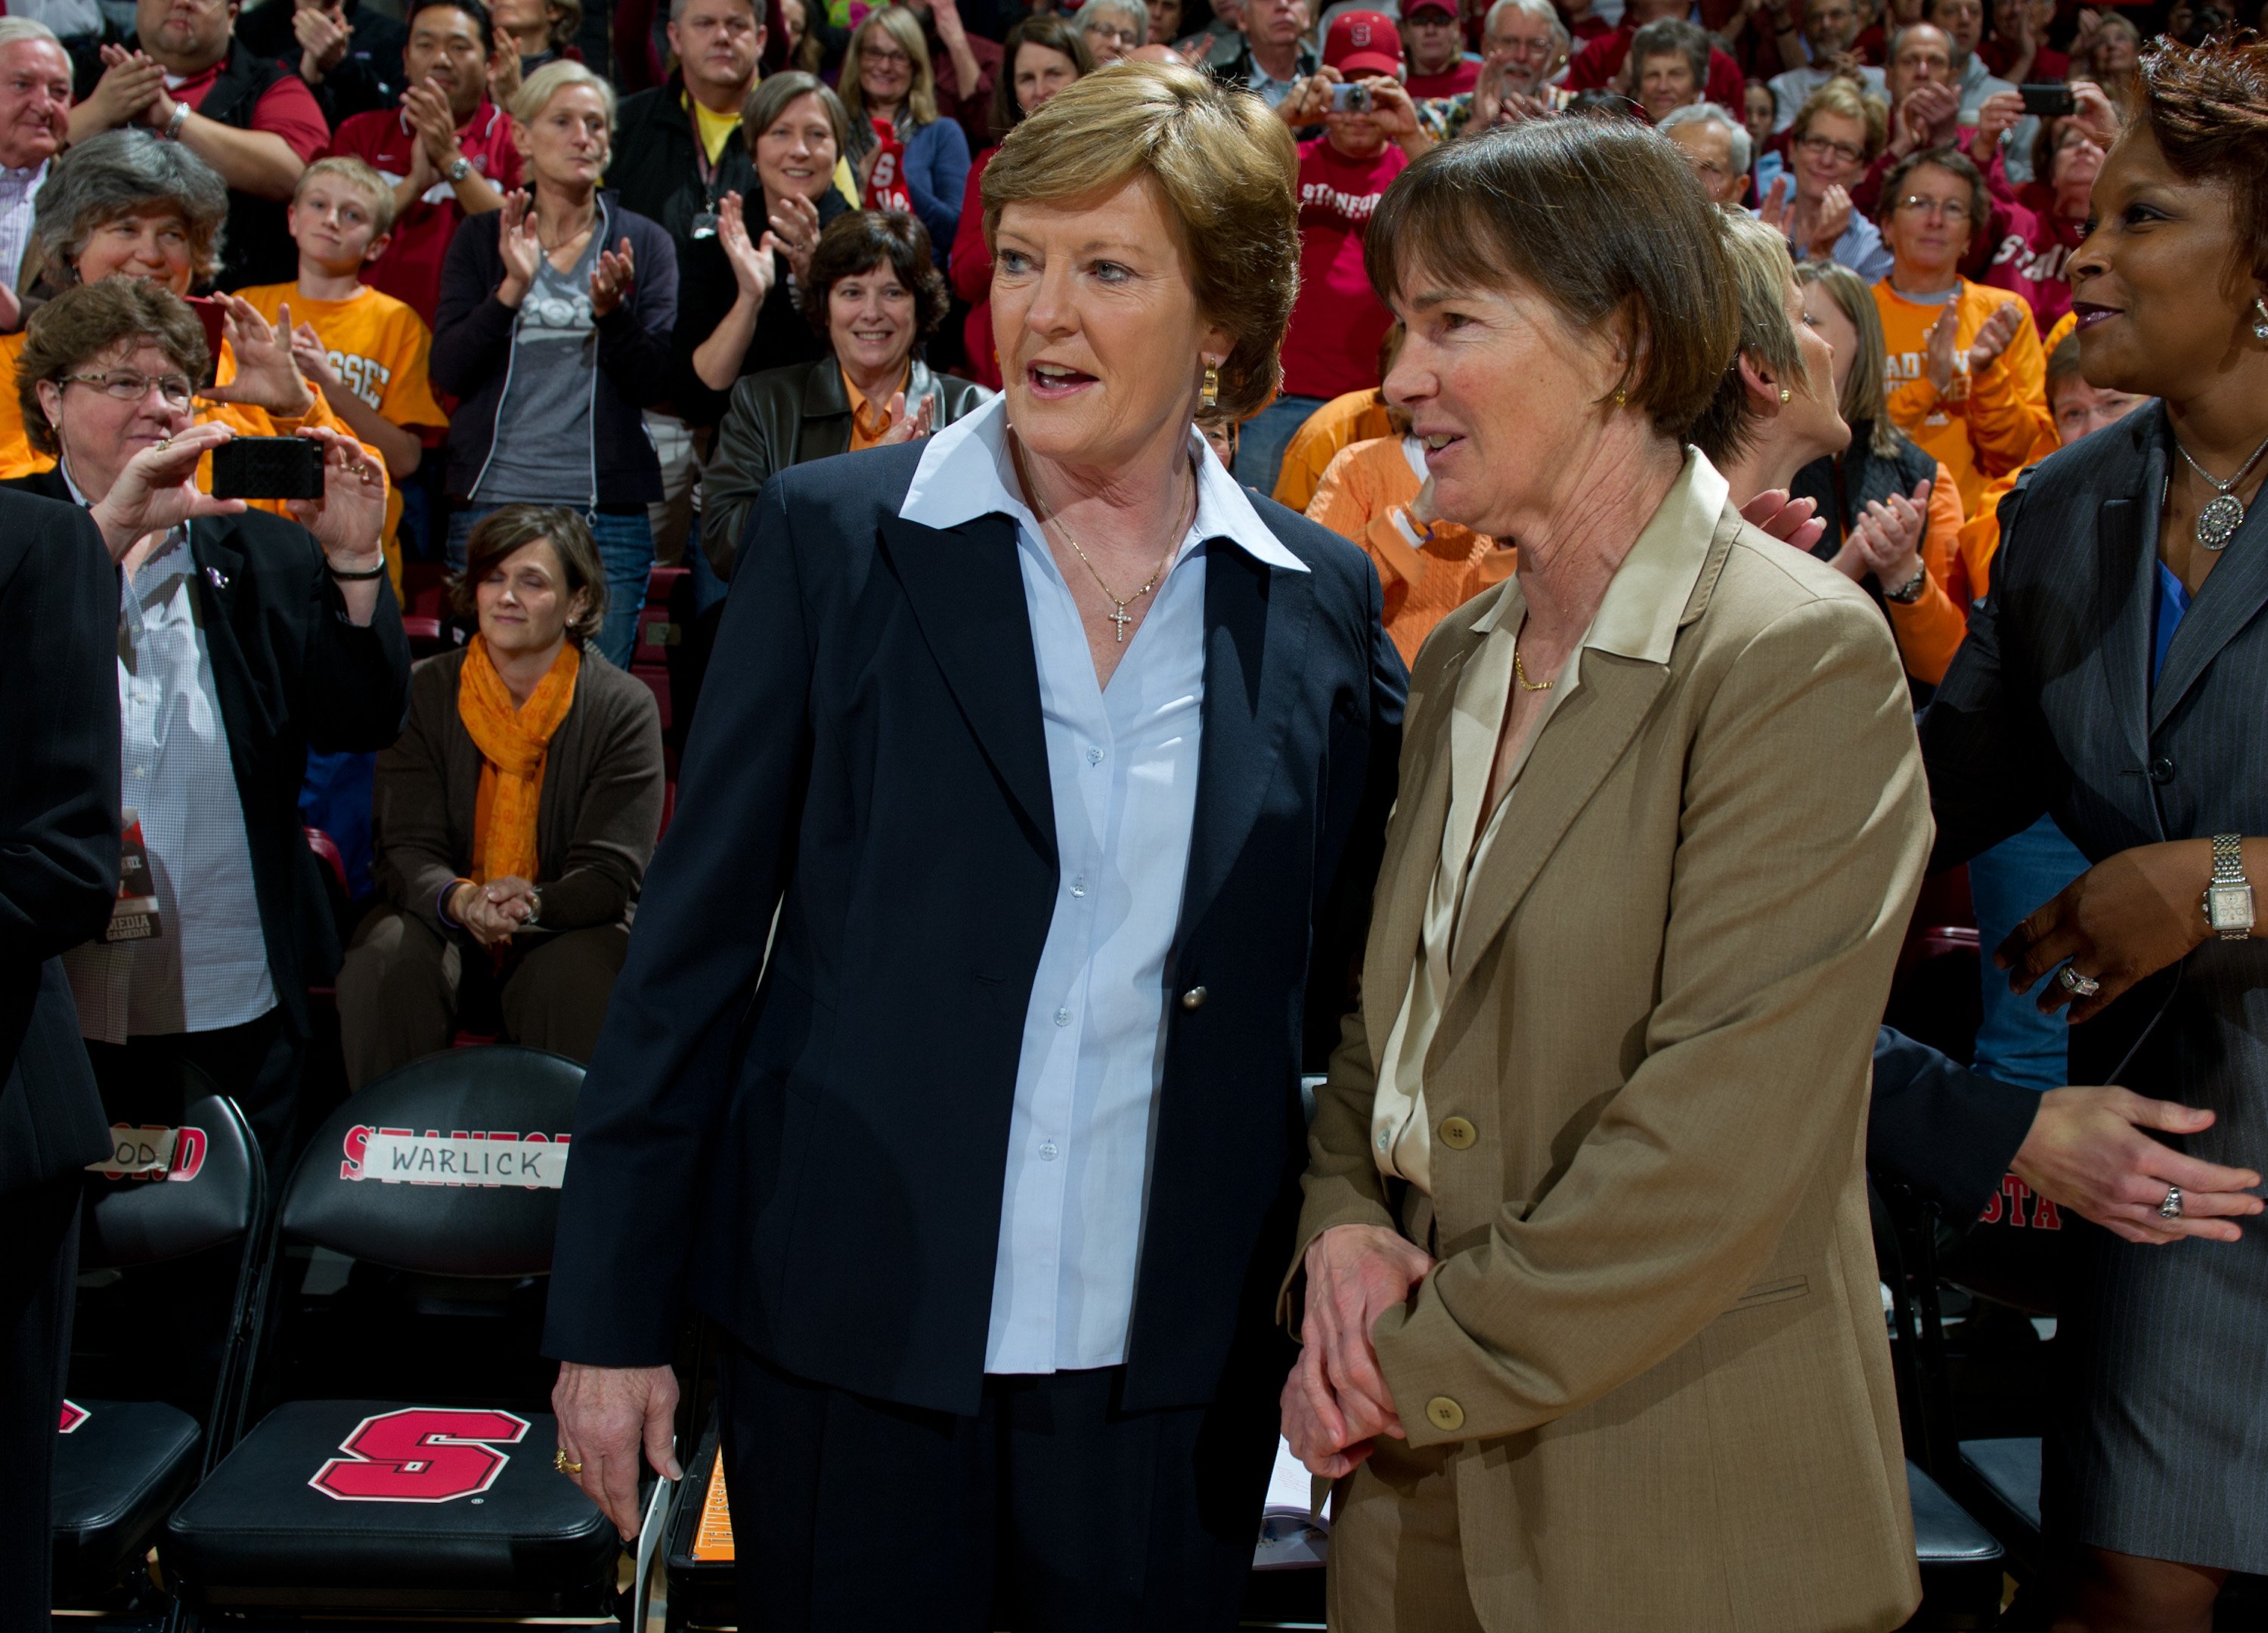 Tara VanDerveer greets Pat Summit before the Stanford women's basketball team's 97-80 win over Tennessee at Maples Pavilion on December 20, 2011.